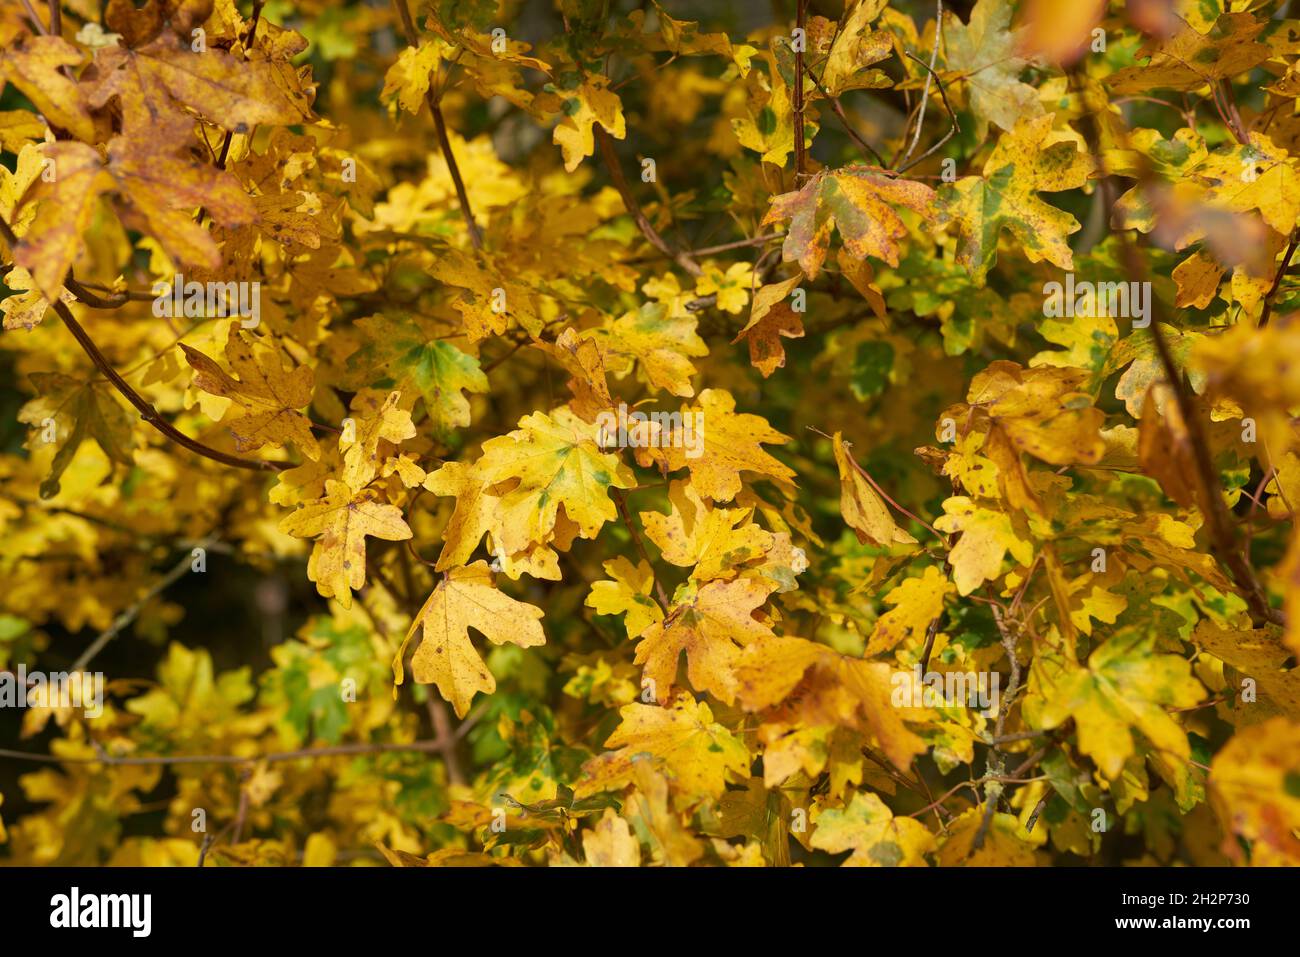 Leaves of a field maple (Acer campestre) with autumn coloration Stock Photo